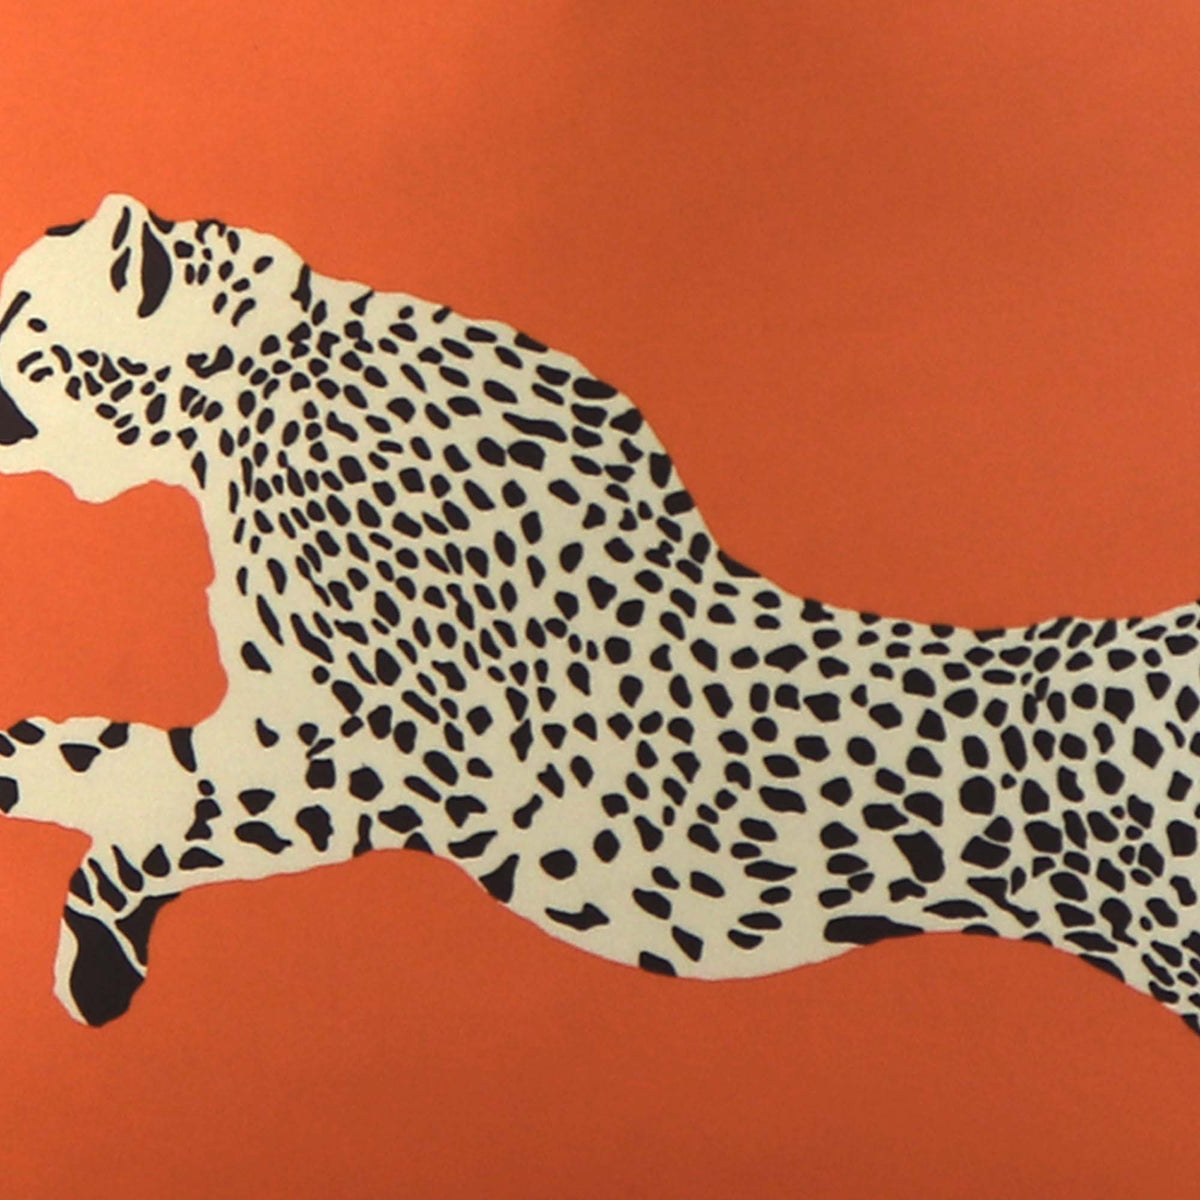 Leaping Cheetah Clementine / 4x4 inch Fabric Swatch